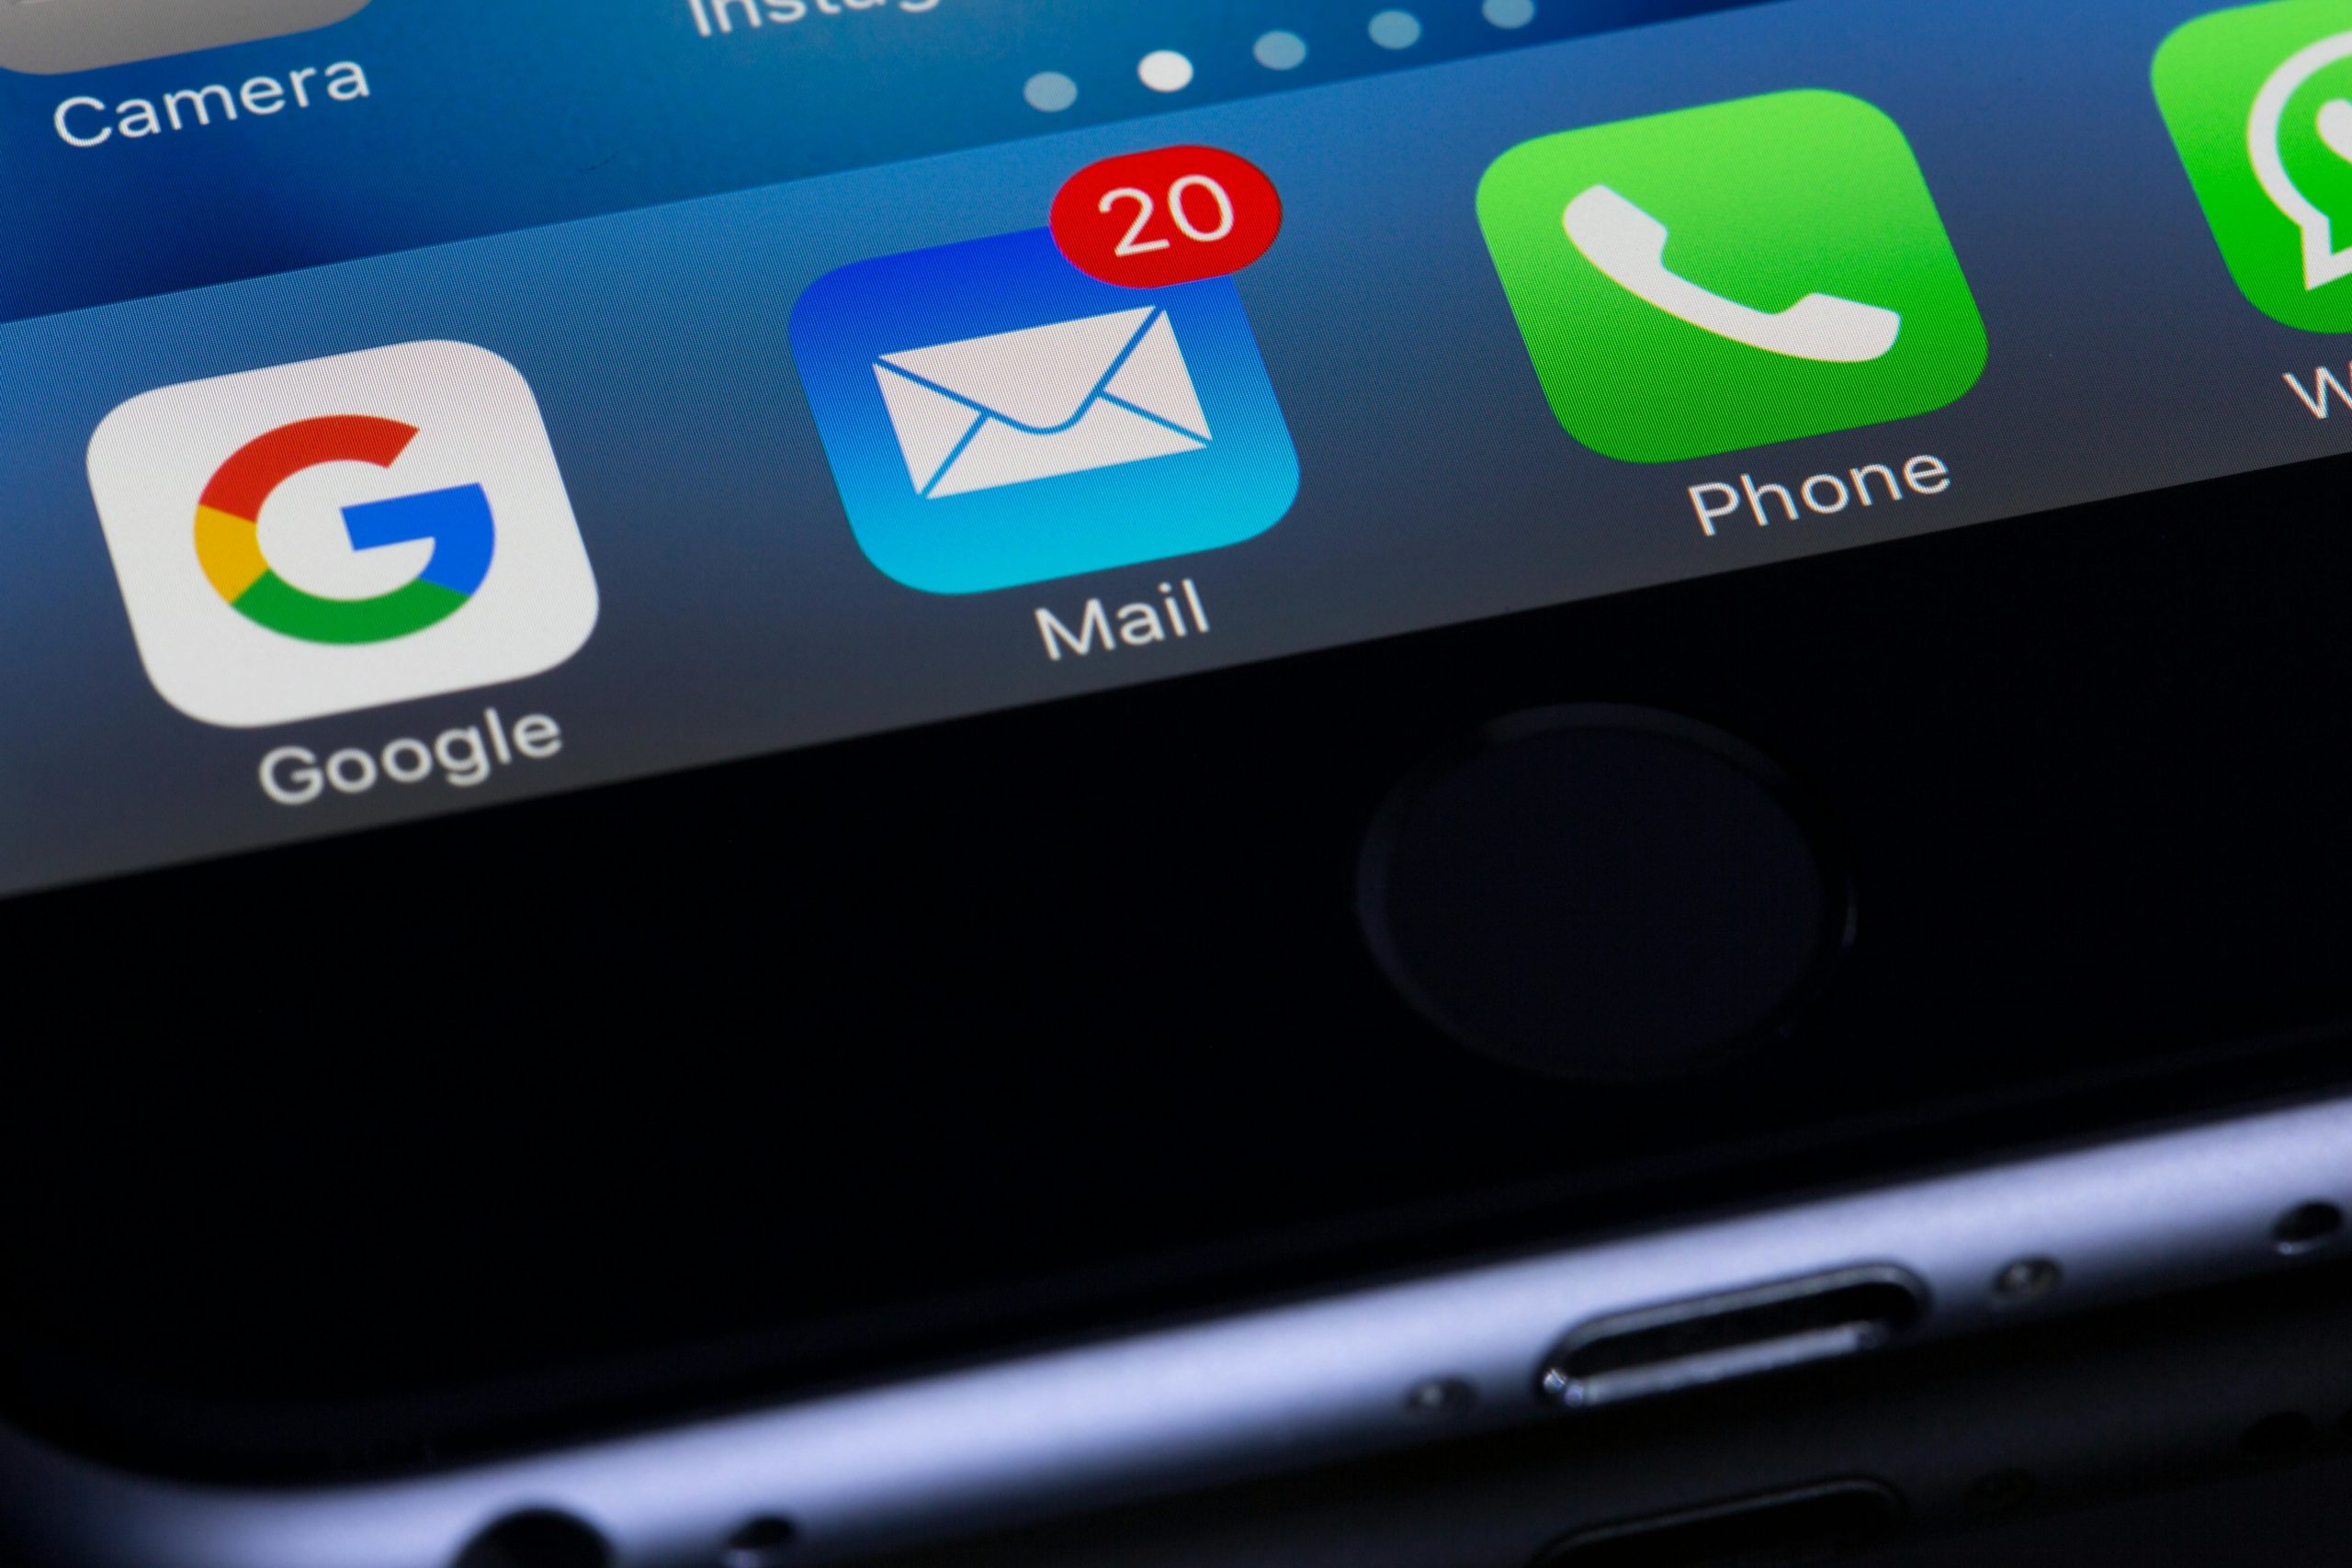 Email app icon